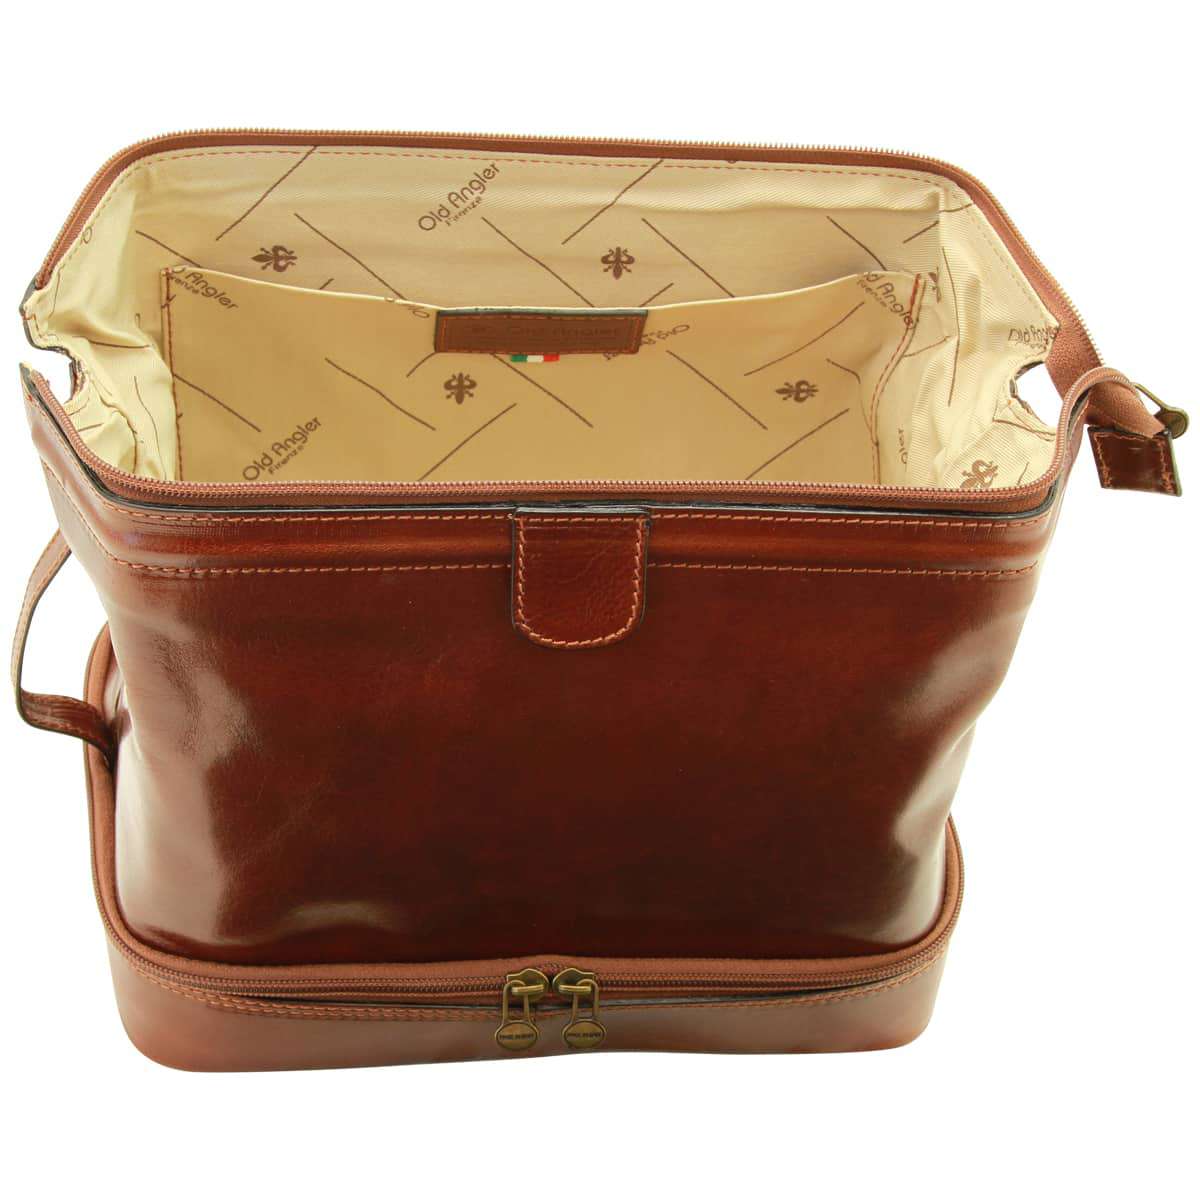 Cowhide leather travel kit - Brown | 066205MA UK | Old Angler Firenze